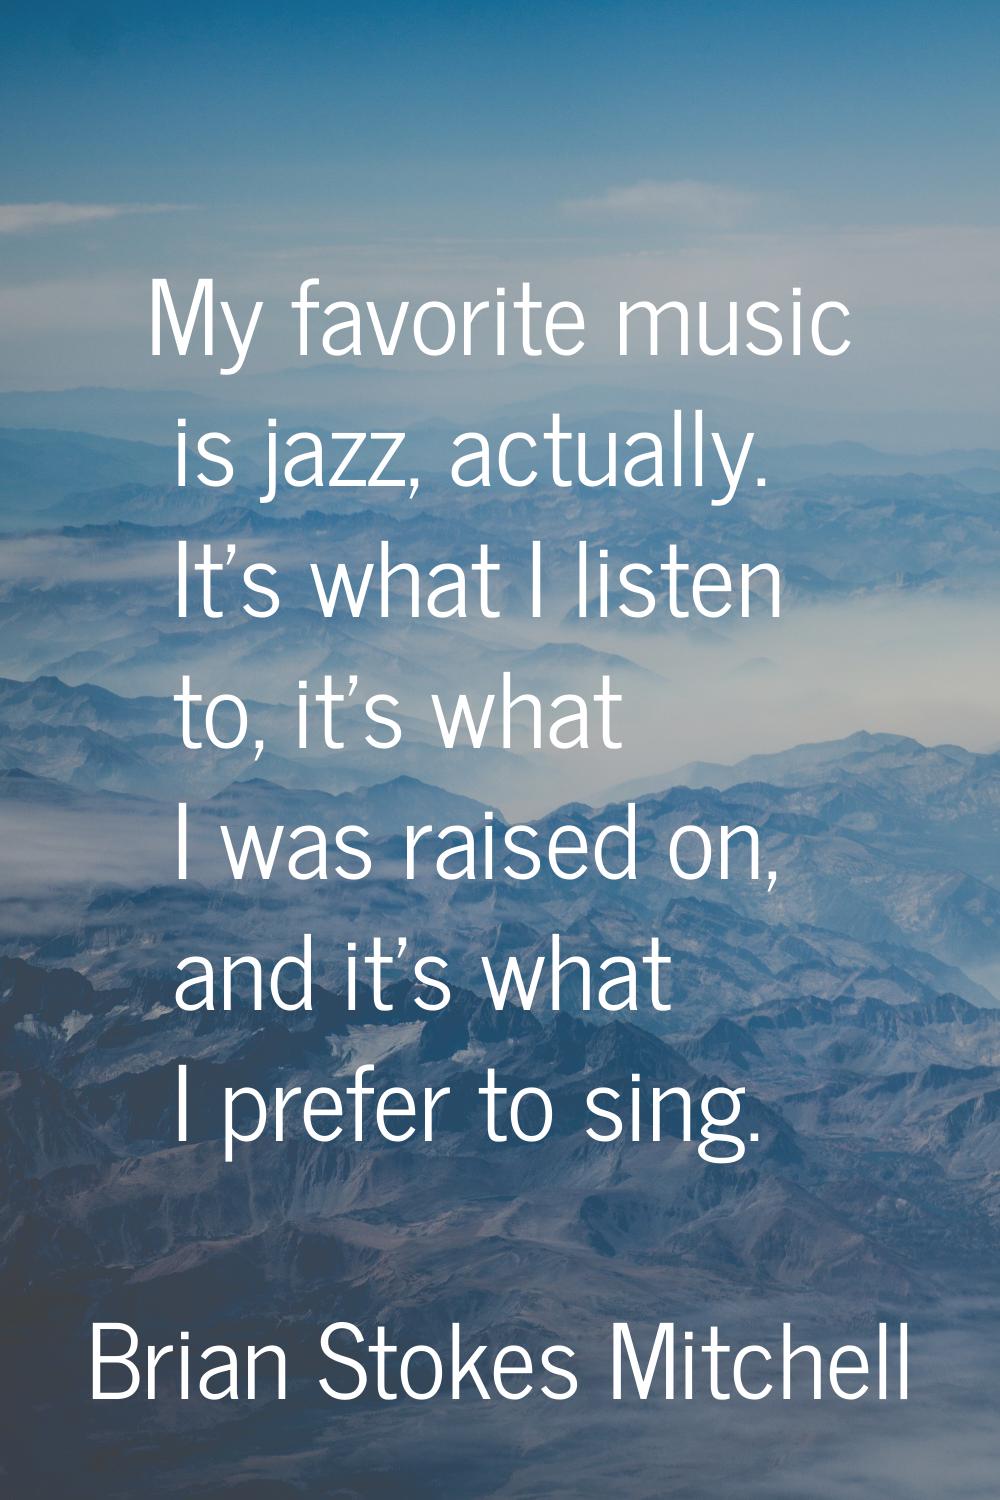 My favorite music is jazz, actually. It's what I listen to, it's what I was raised on, and it's wha